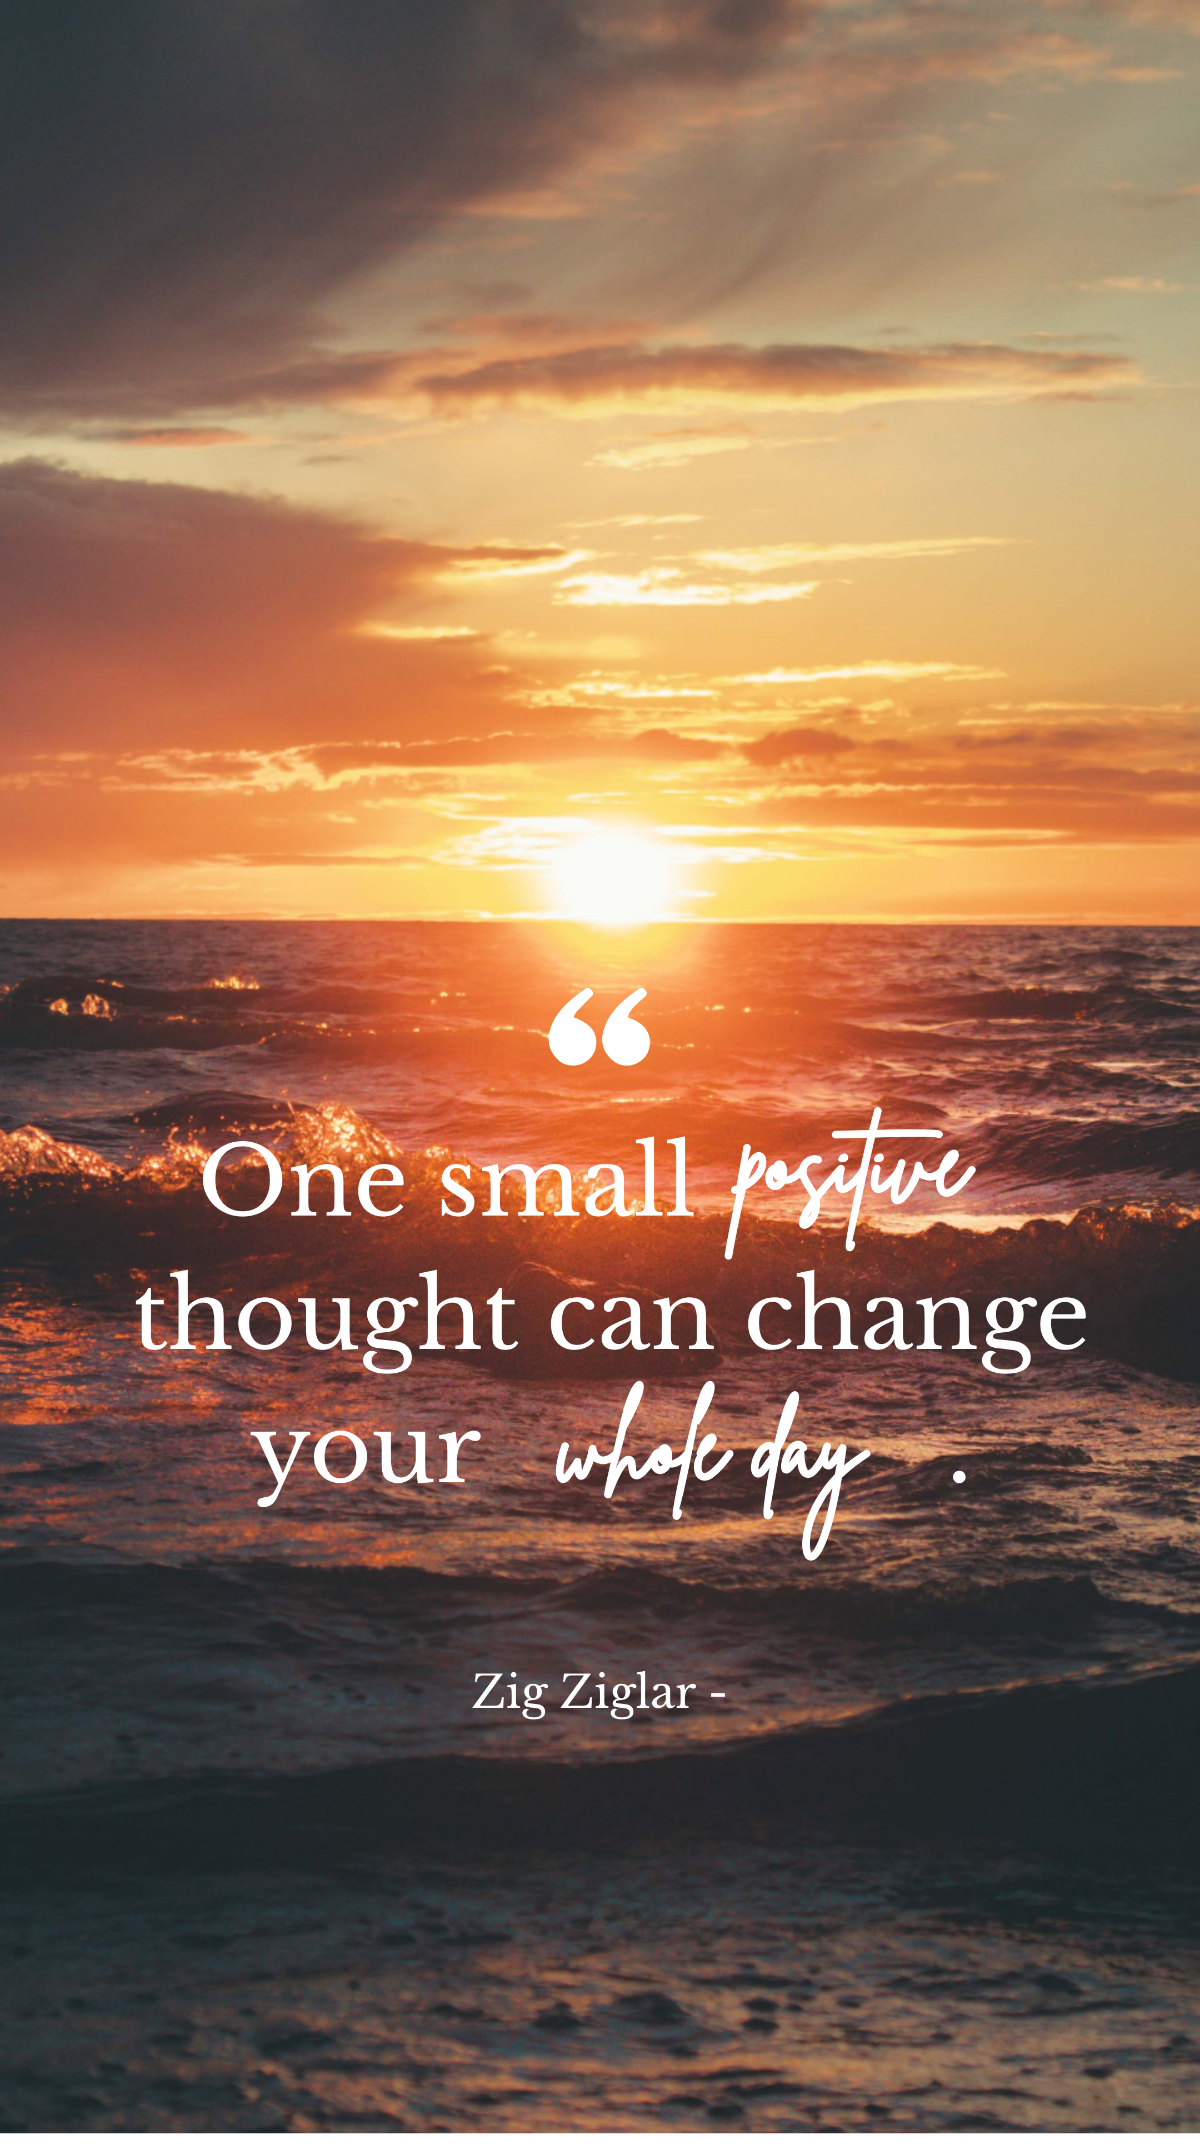 Zig Ziglar - One small positive thought can change your whole day. Template